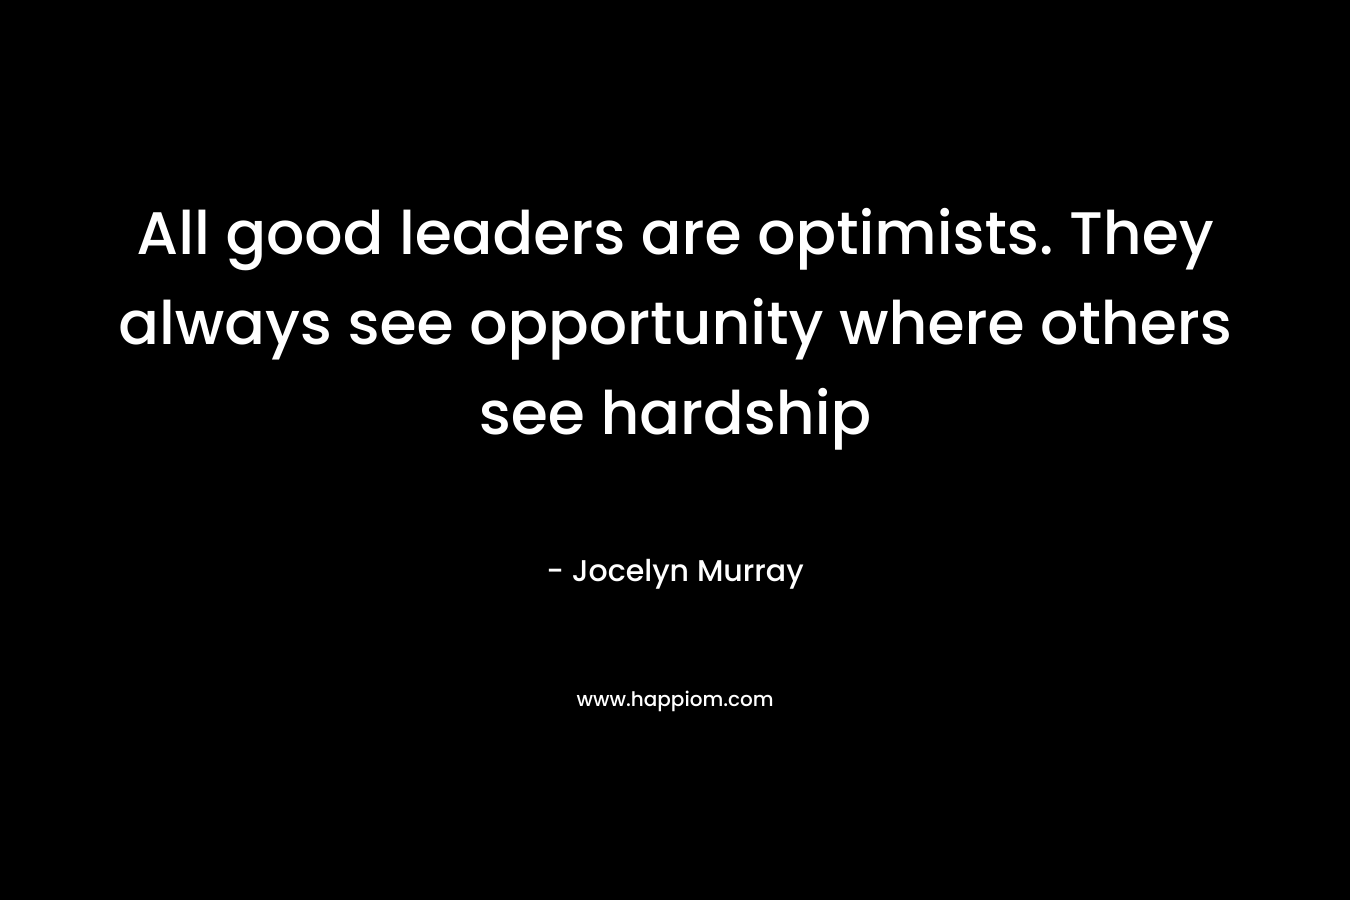 All good leaders are optimists. They always see opportunity where others see hardship